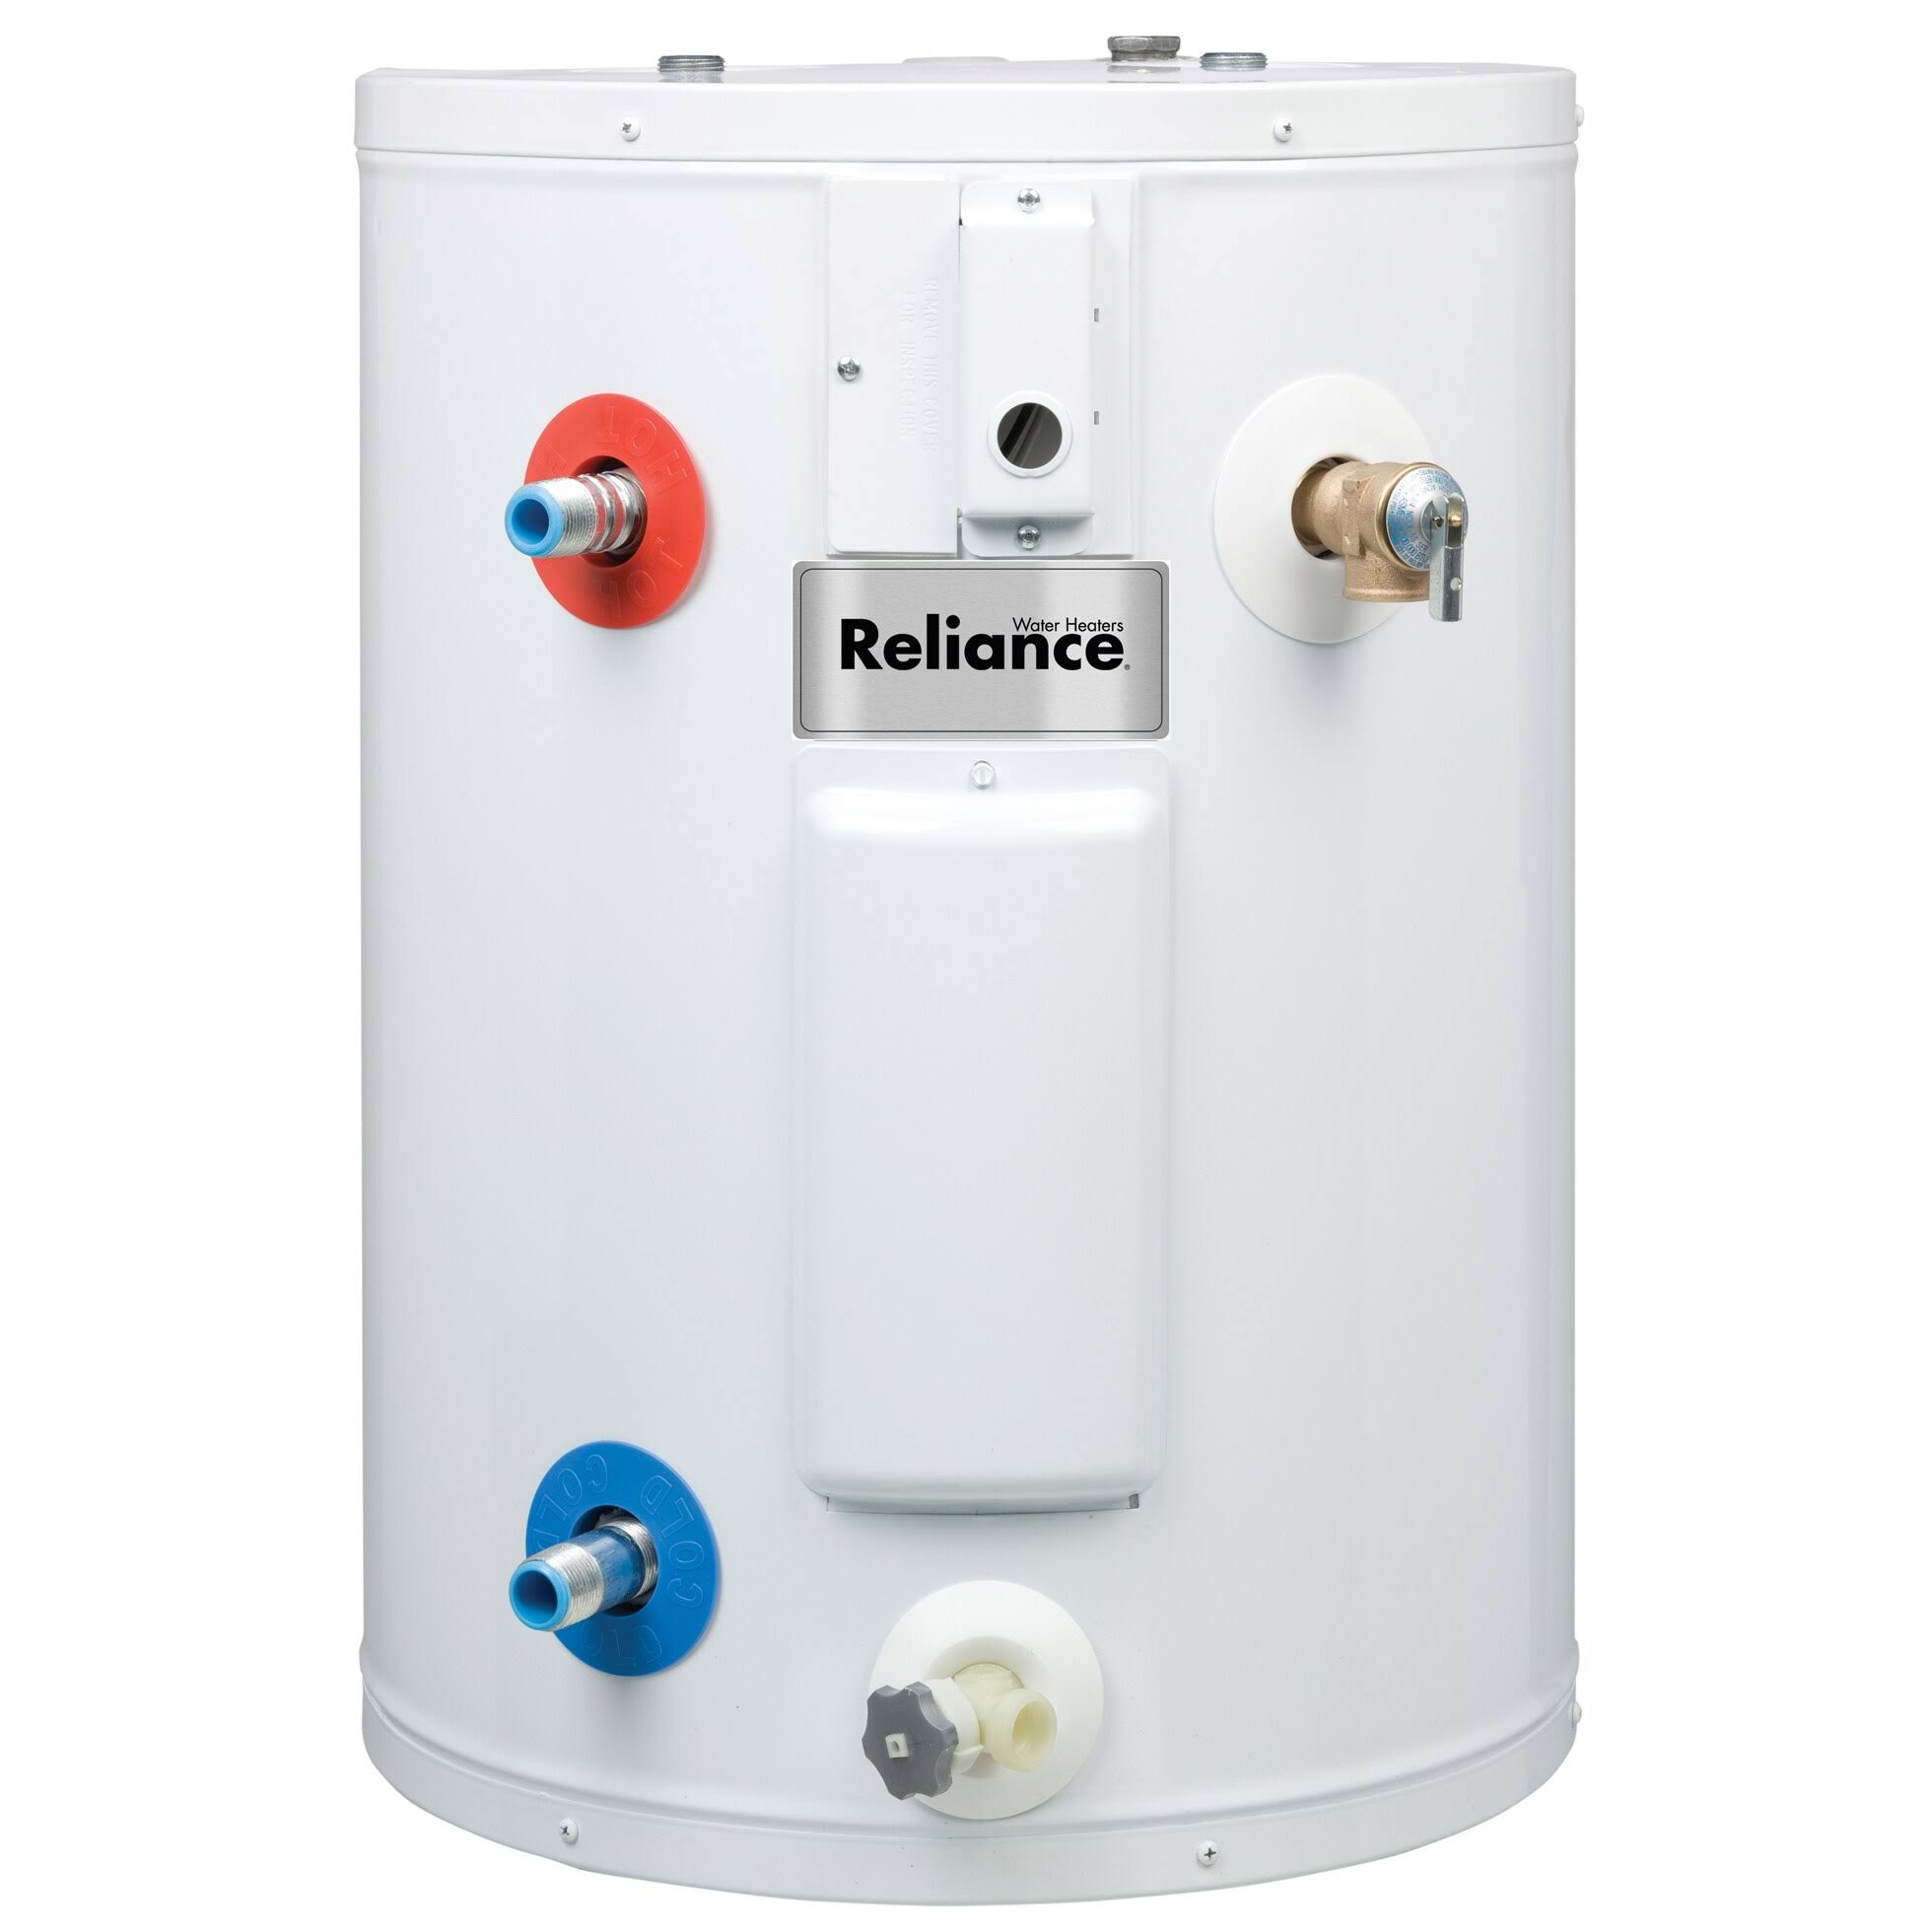 Reliance 620SOMSK Compact Electric Water Heater - 20gal, 1650W